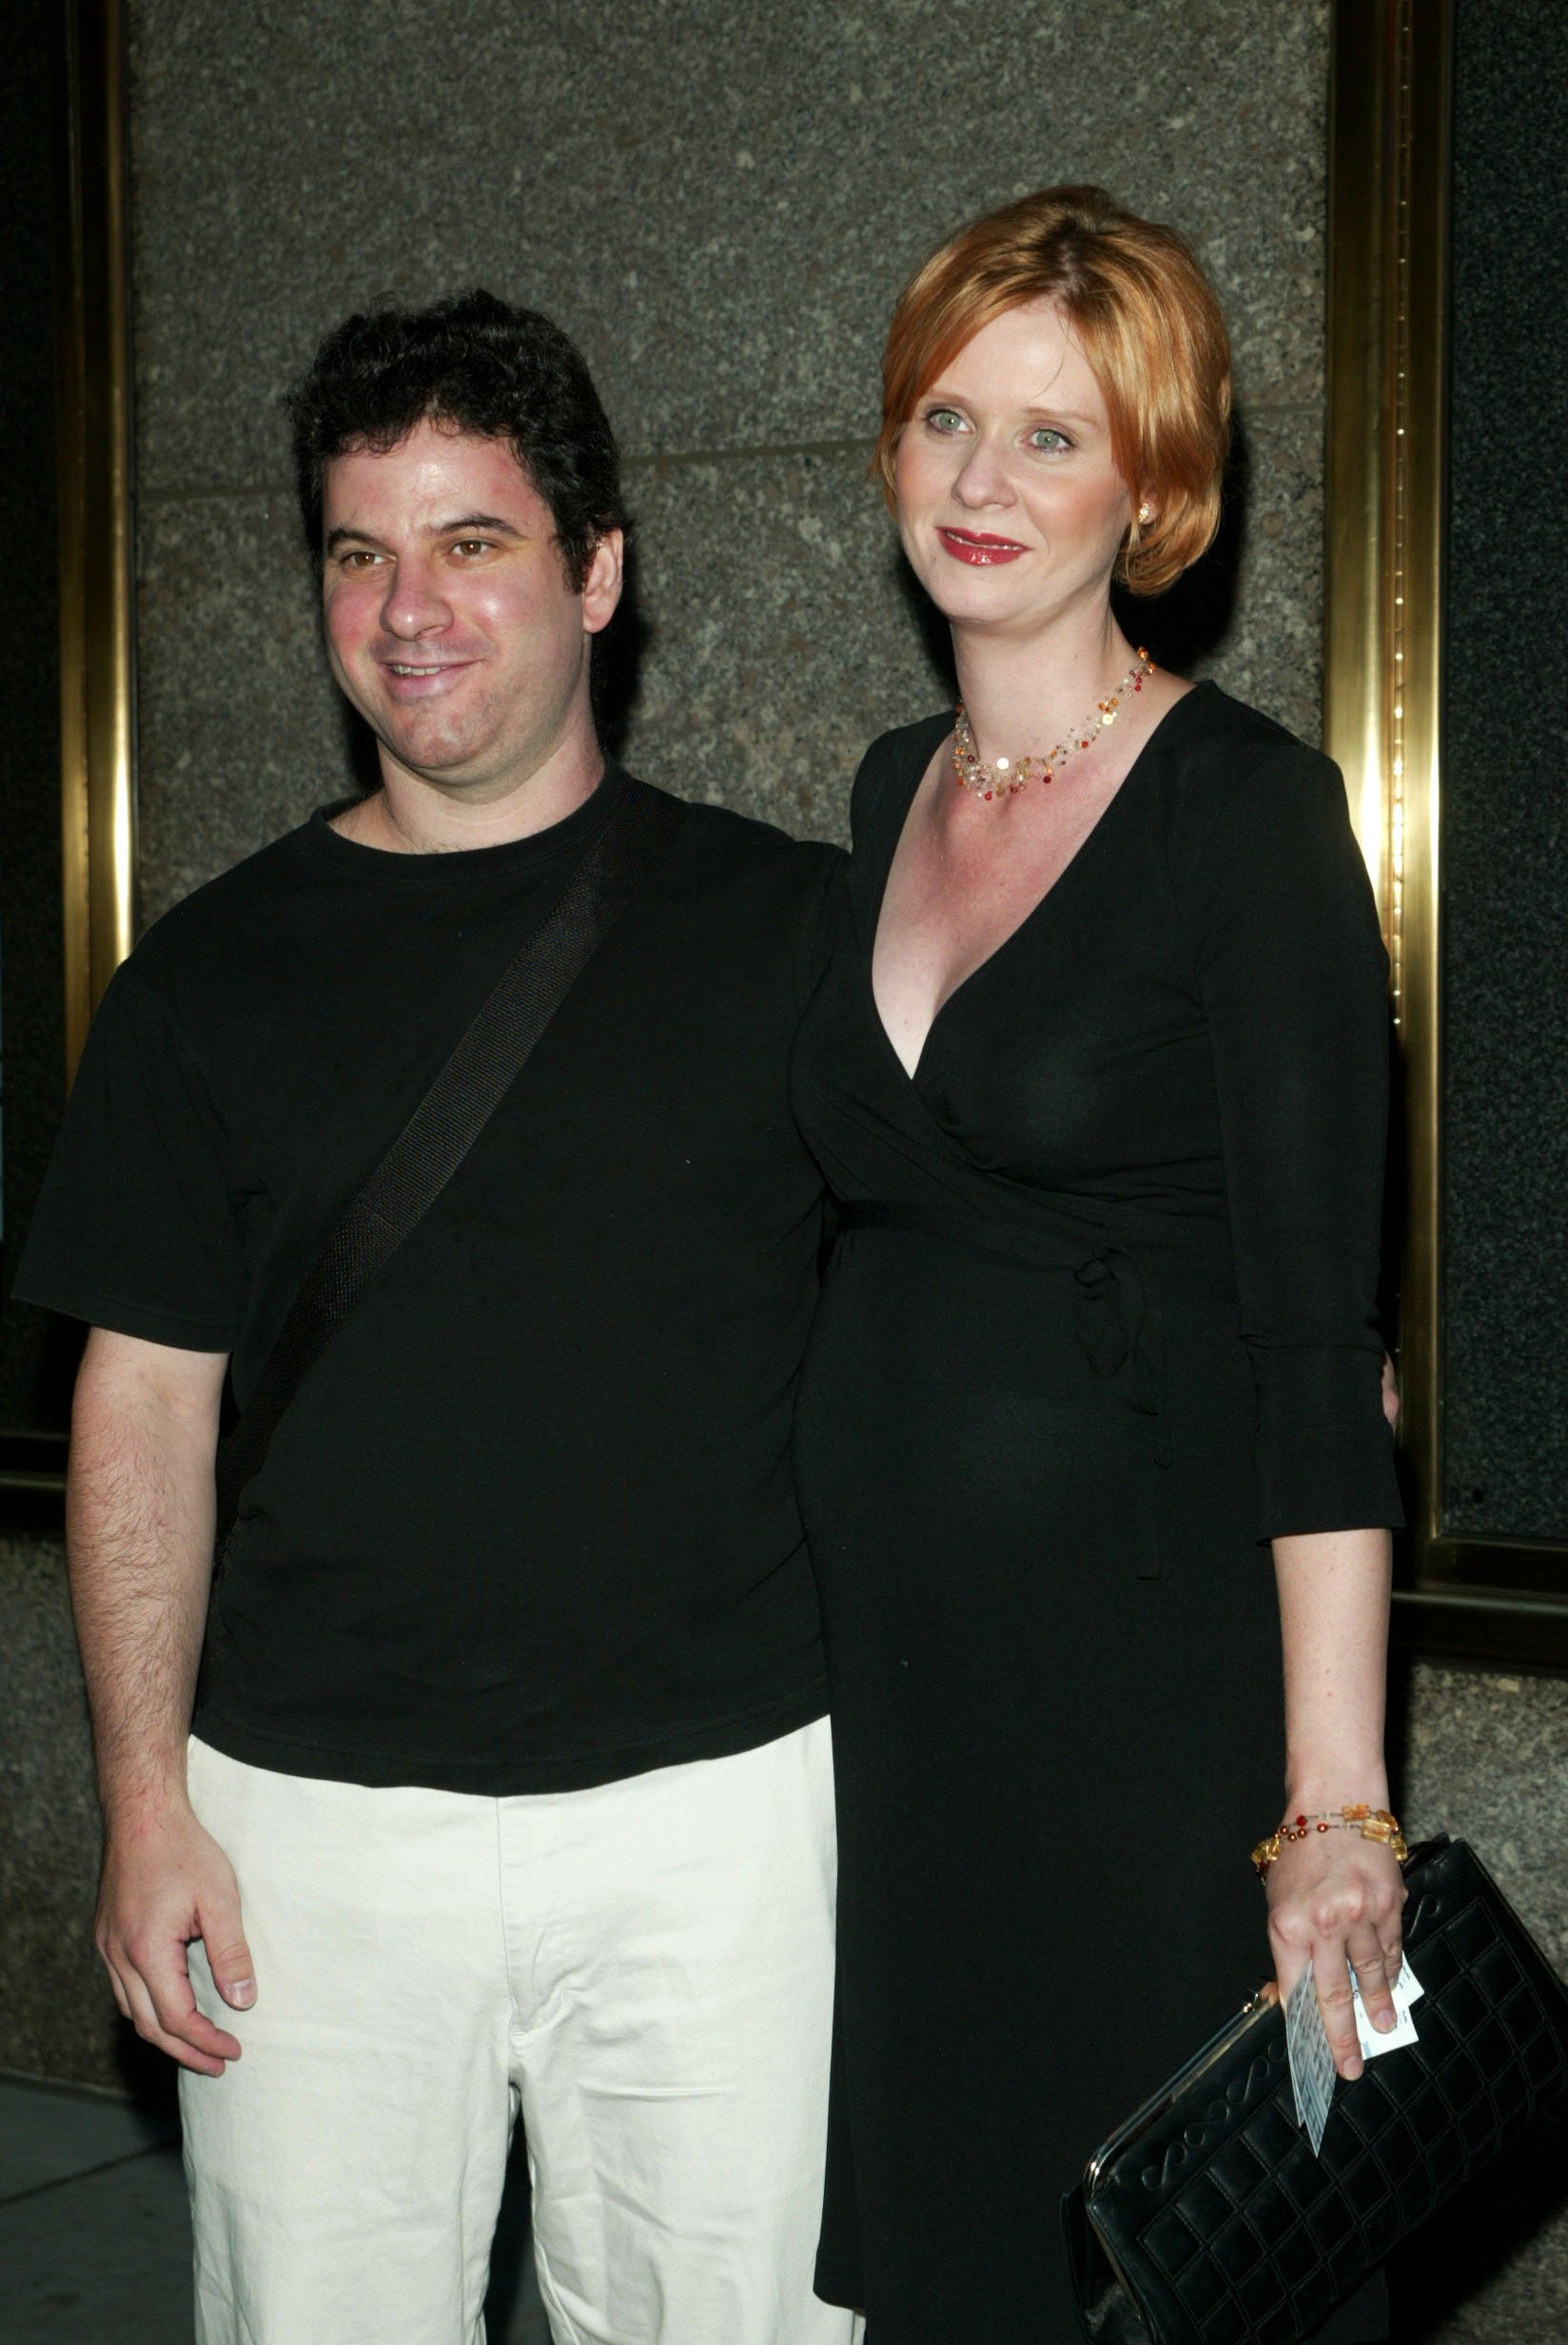 Cynthia Nixon and Danny Mozes attend the world premiere of the fourth season of HBO's "The Sopranos" on September 5, 2002, in New York City on September 5, 2002. | Source: Getty Images